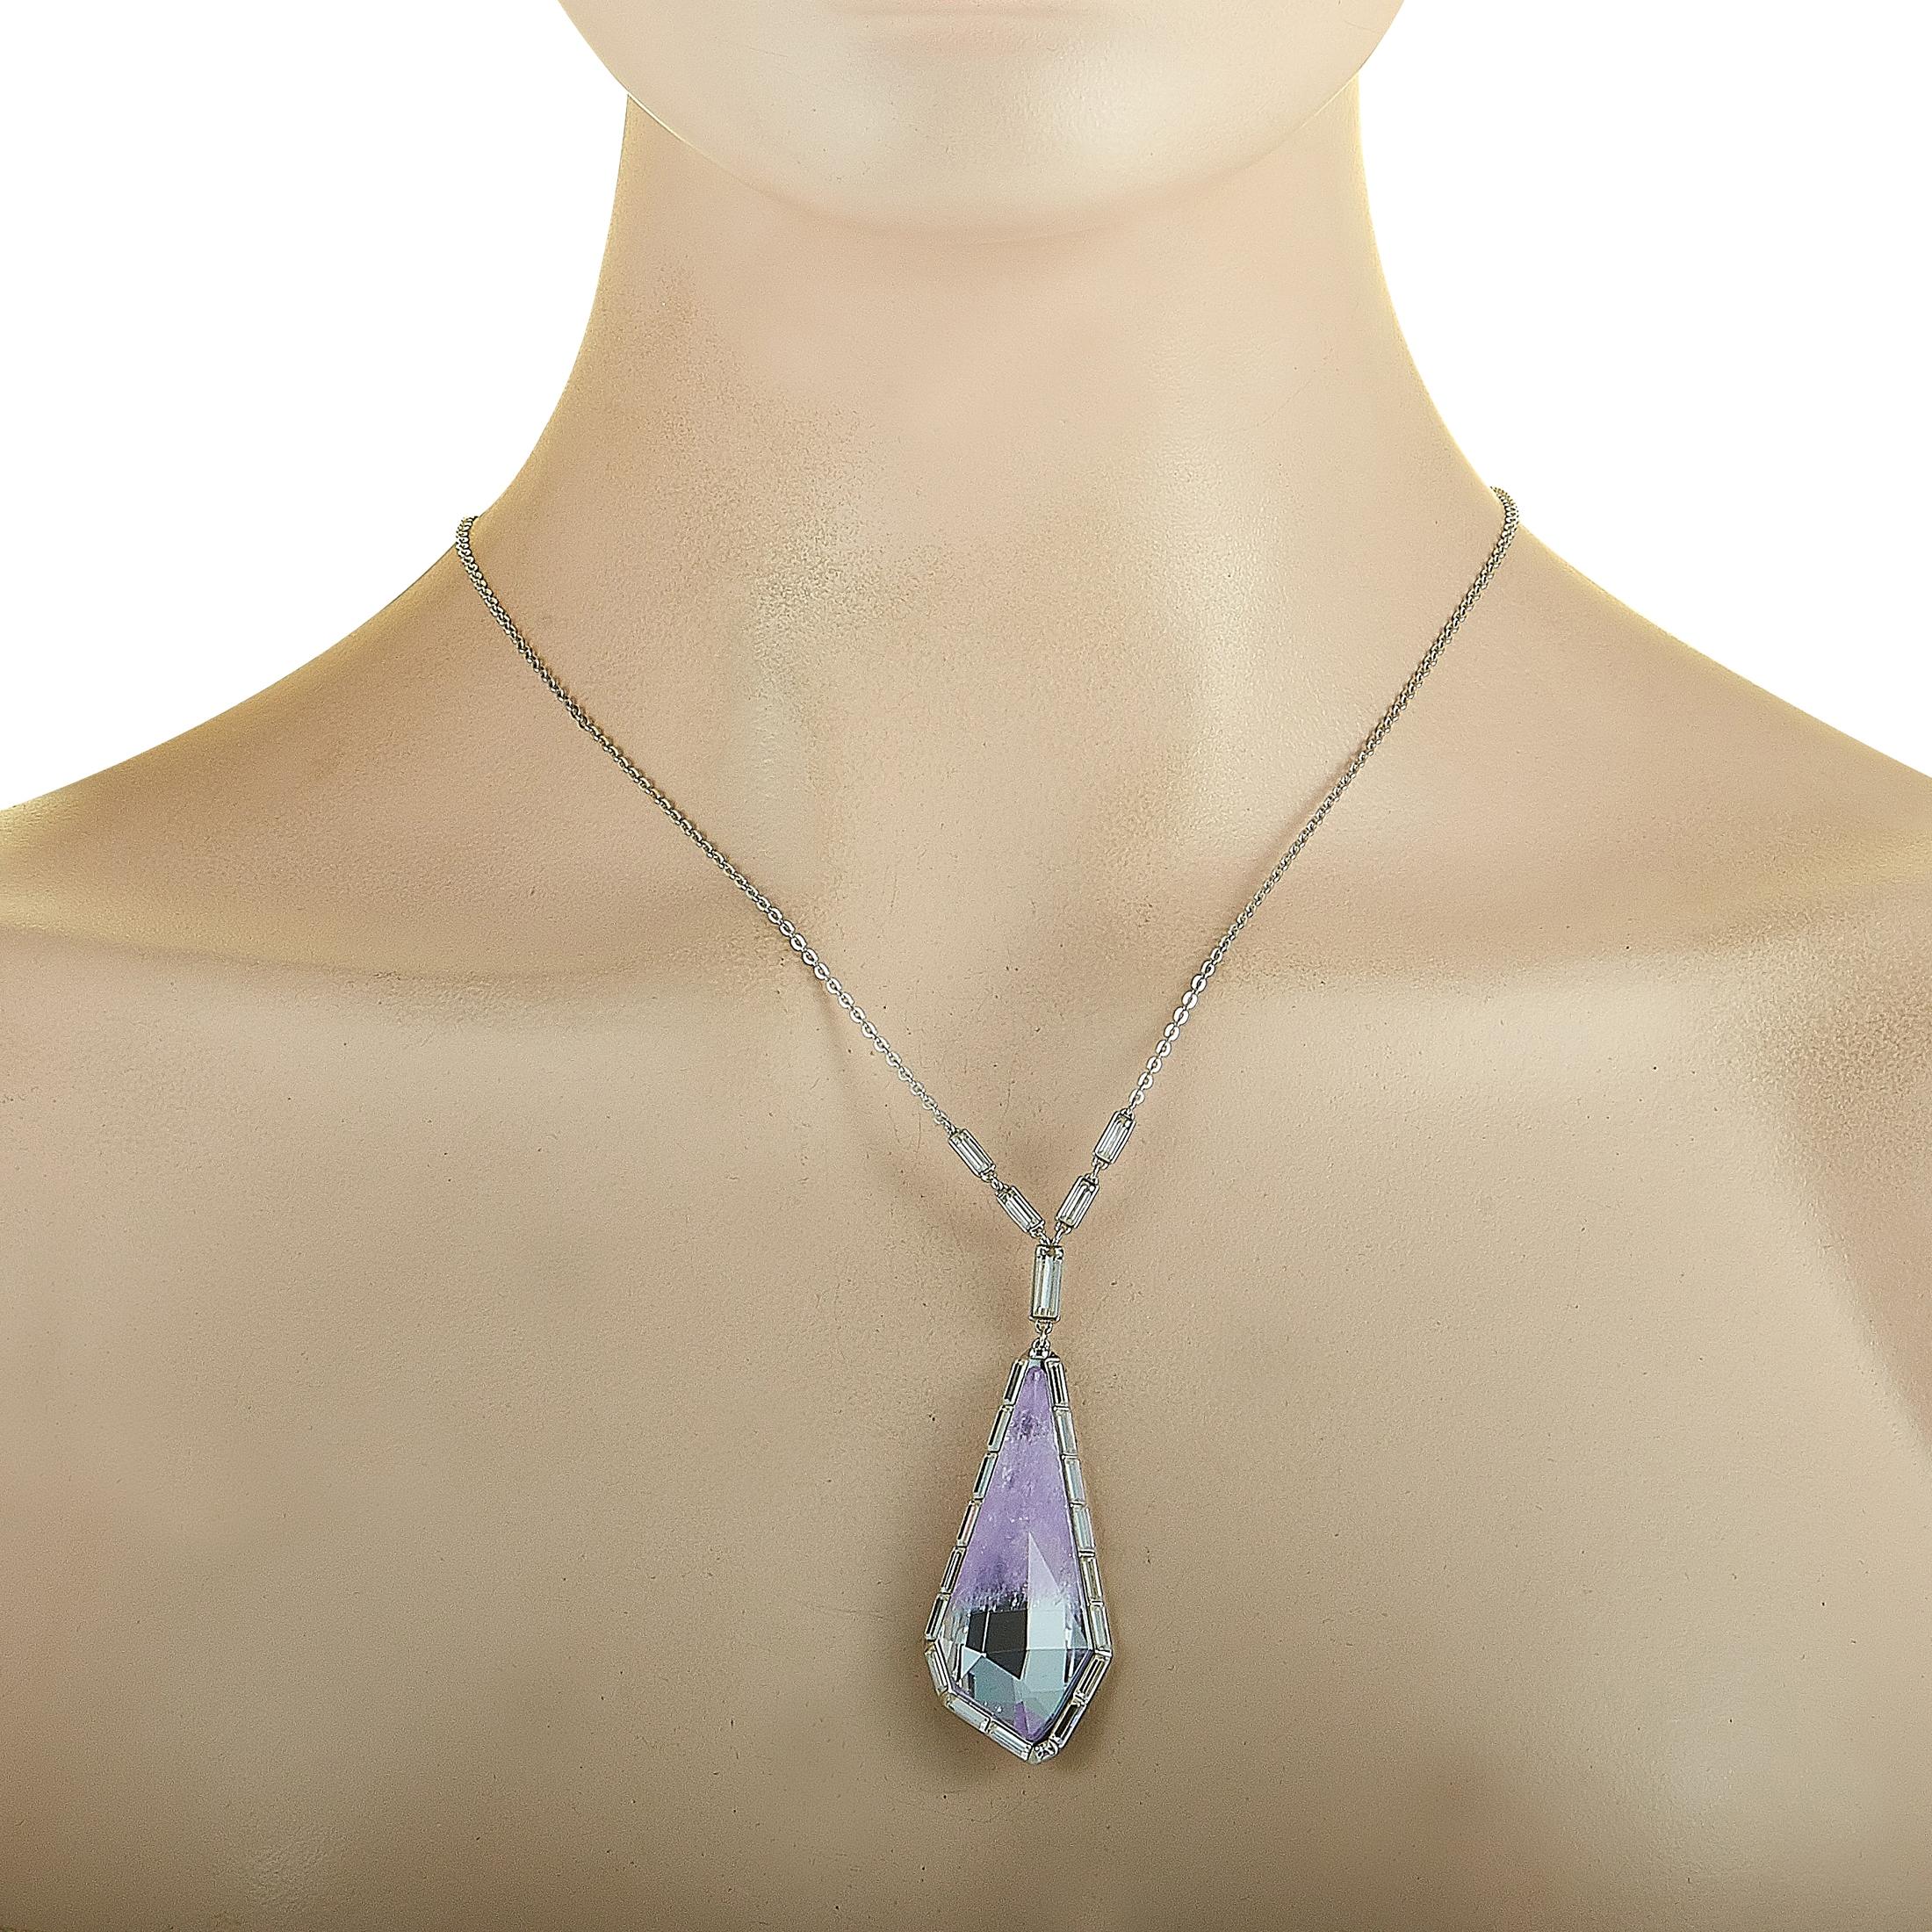 This Swarovski necklace is made of rhodium-plated stainless steel, boasting a 28” chain with lobster claw closure and a pendant that measures 2.50” in length and 0.87” in width. The necklace is decorated with purple and clear Swarovski crystals.